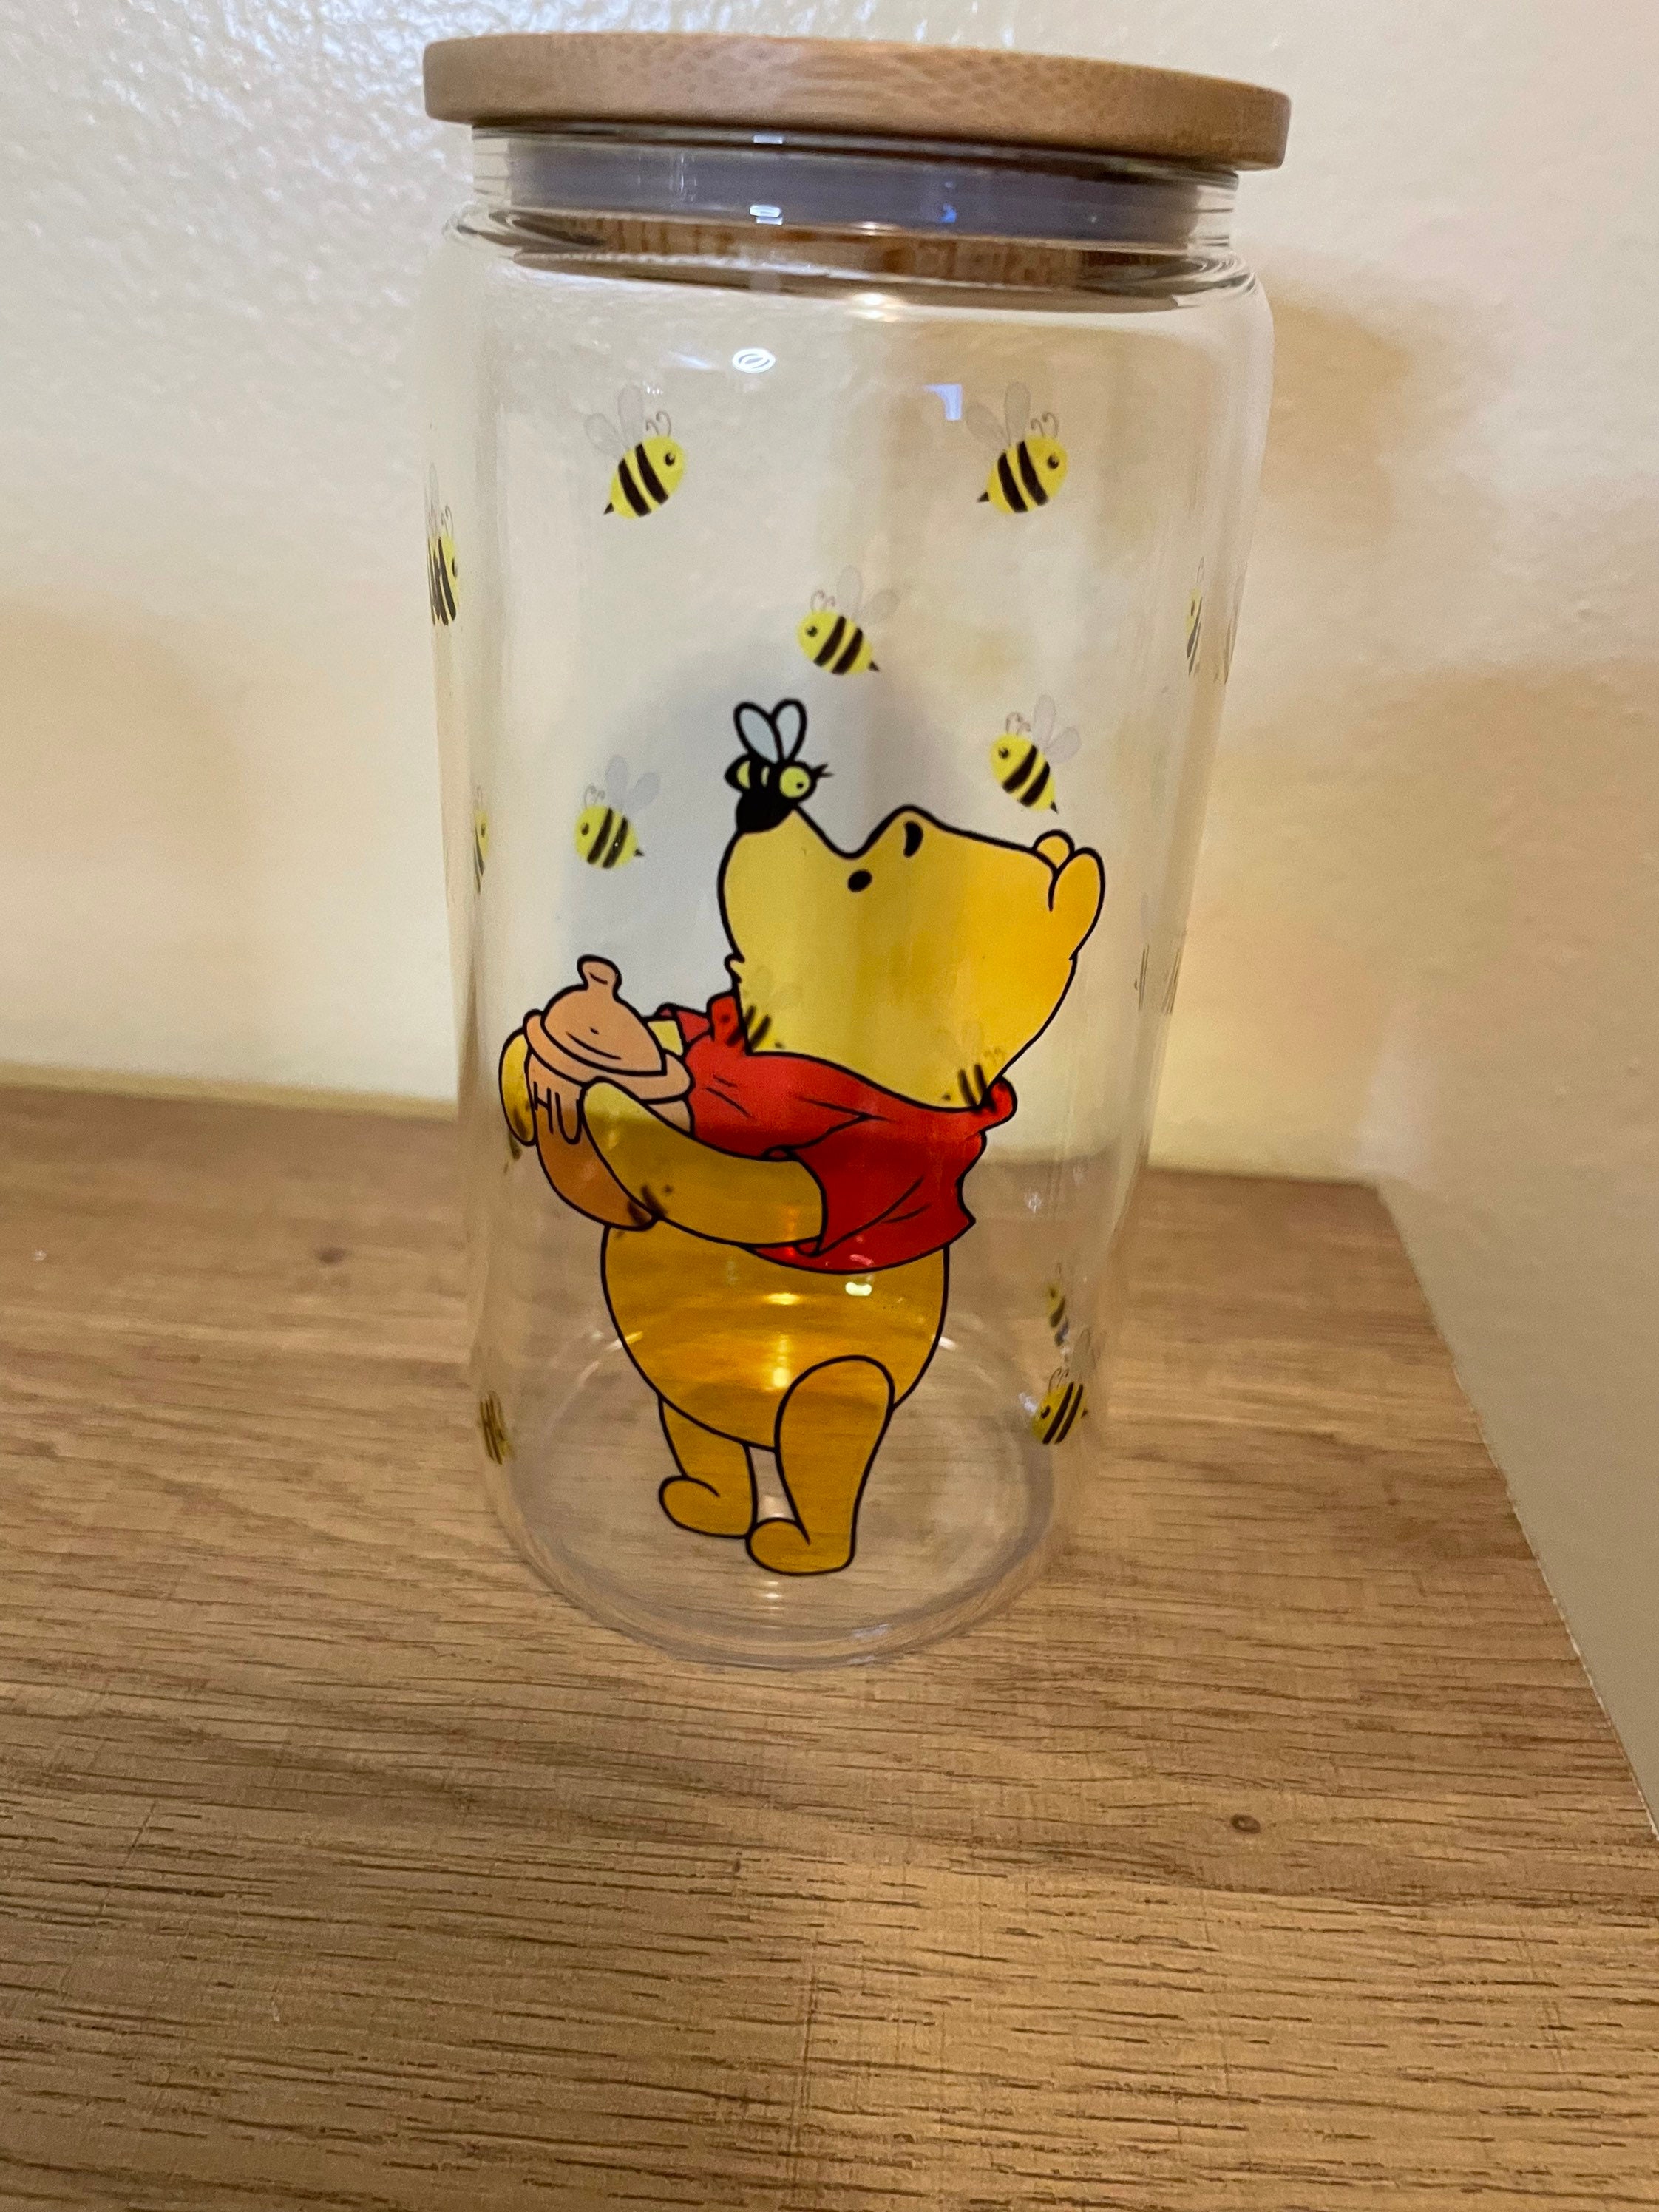 iCare : Winnie The Pooh Straw Cup